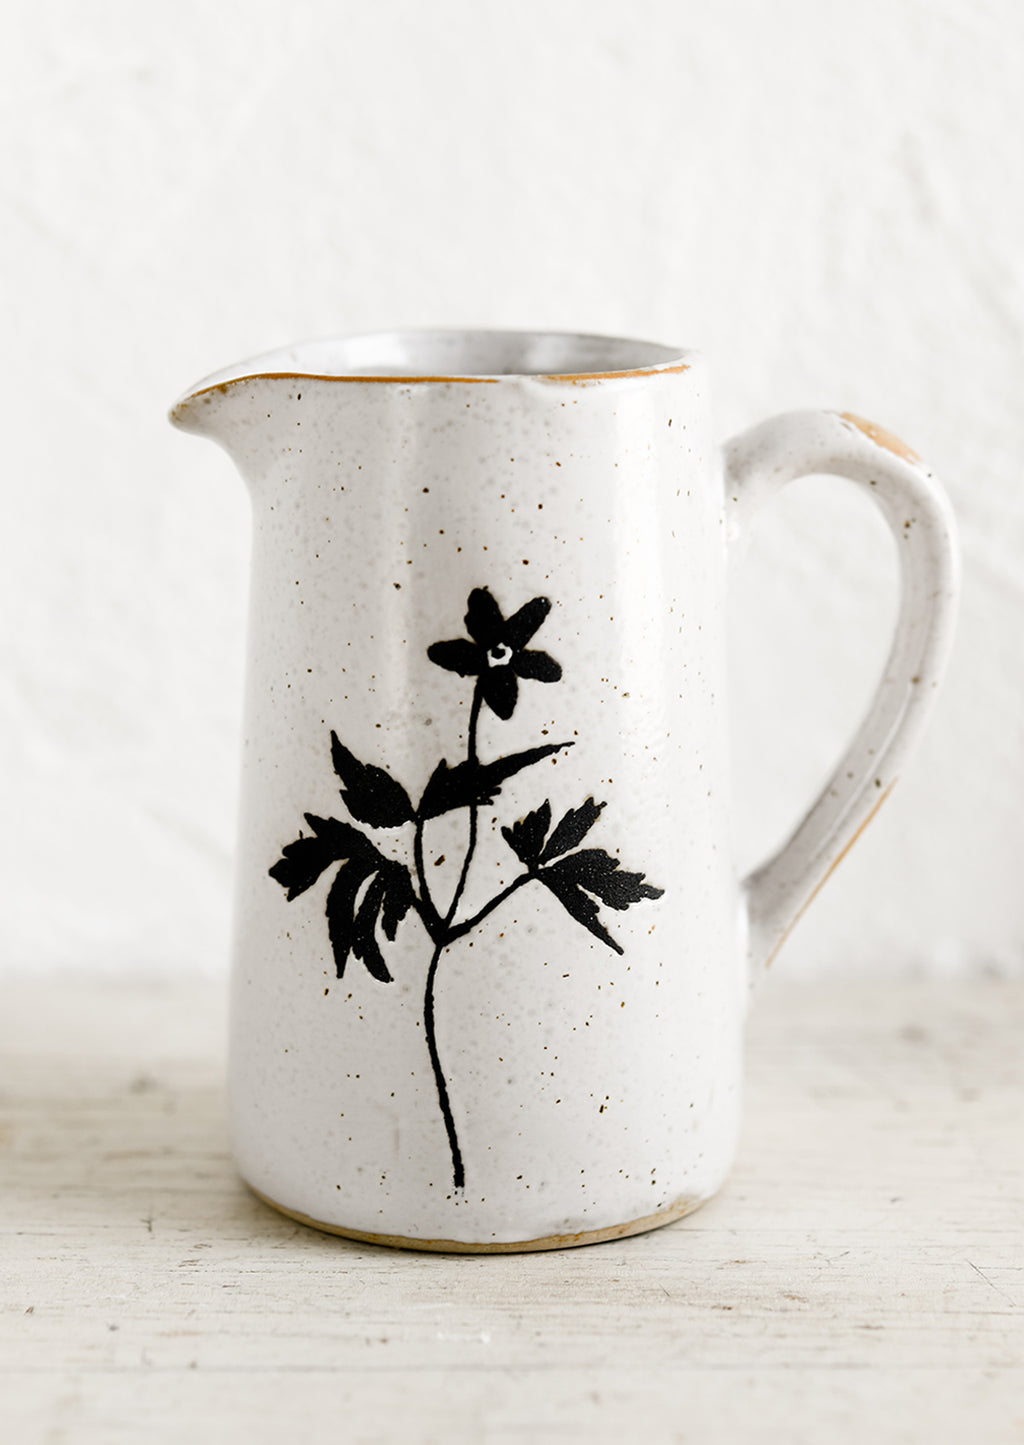 2: A small speckled white ceramic creamer pitcher with black flower silhouette.